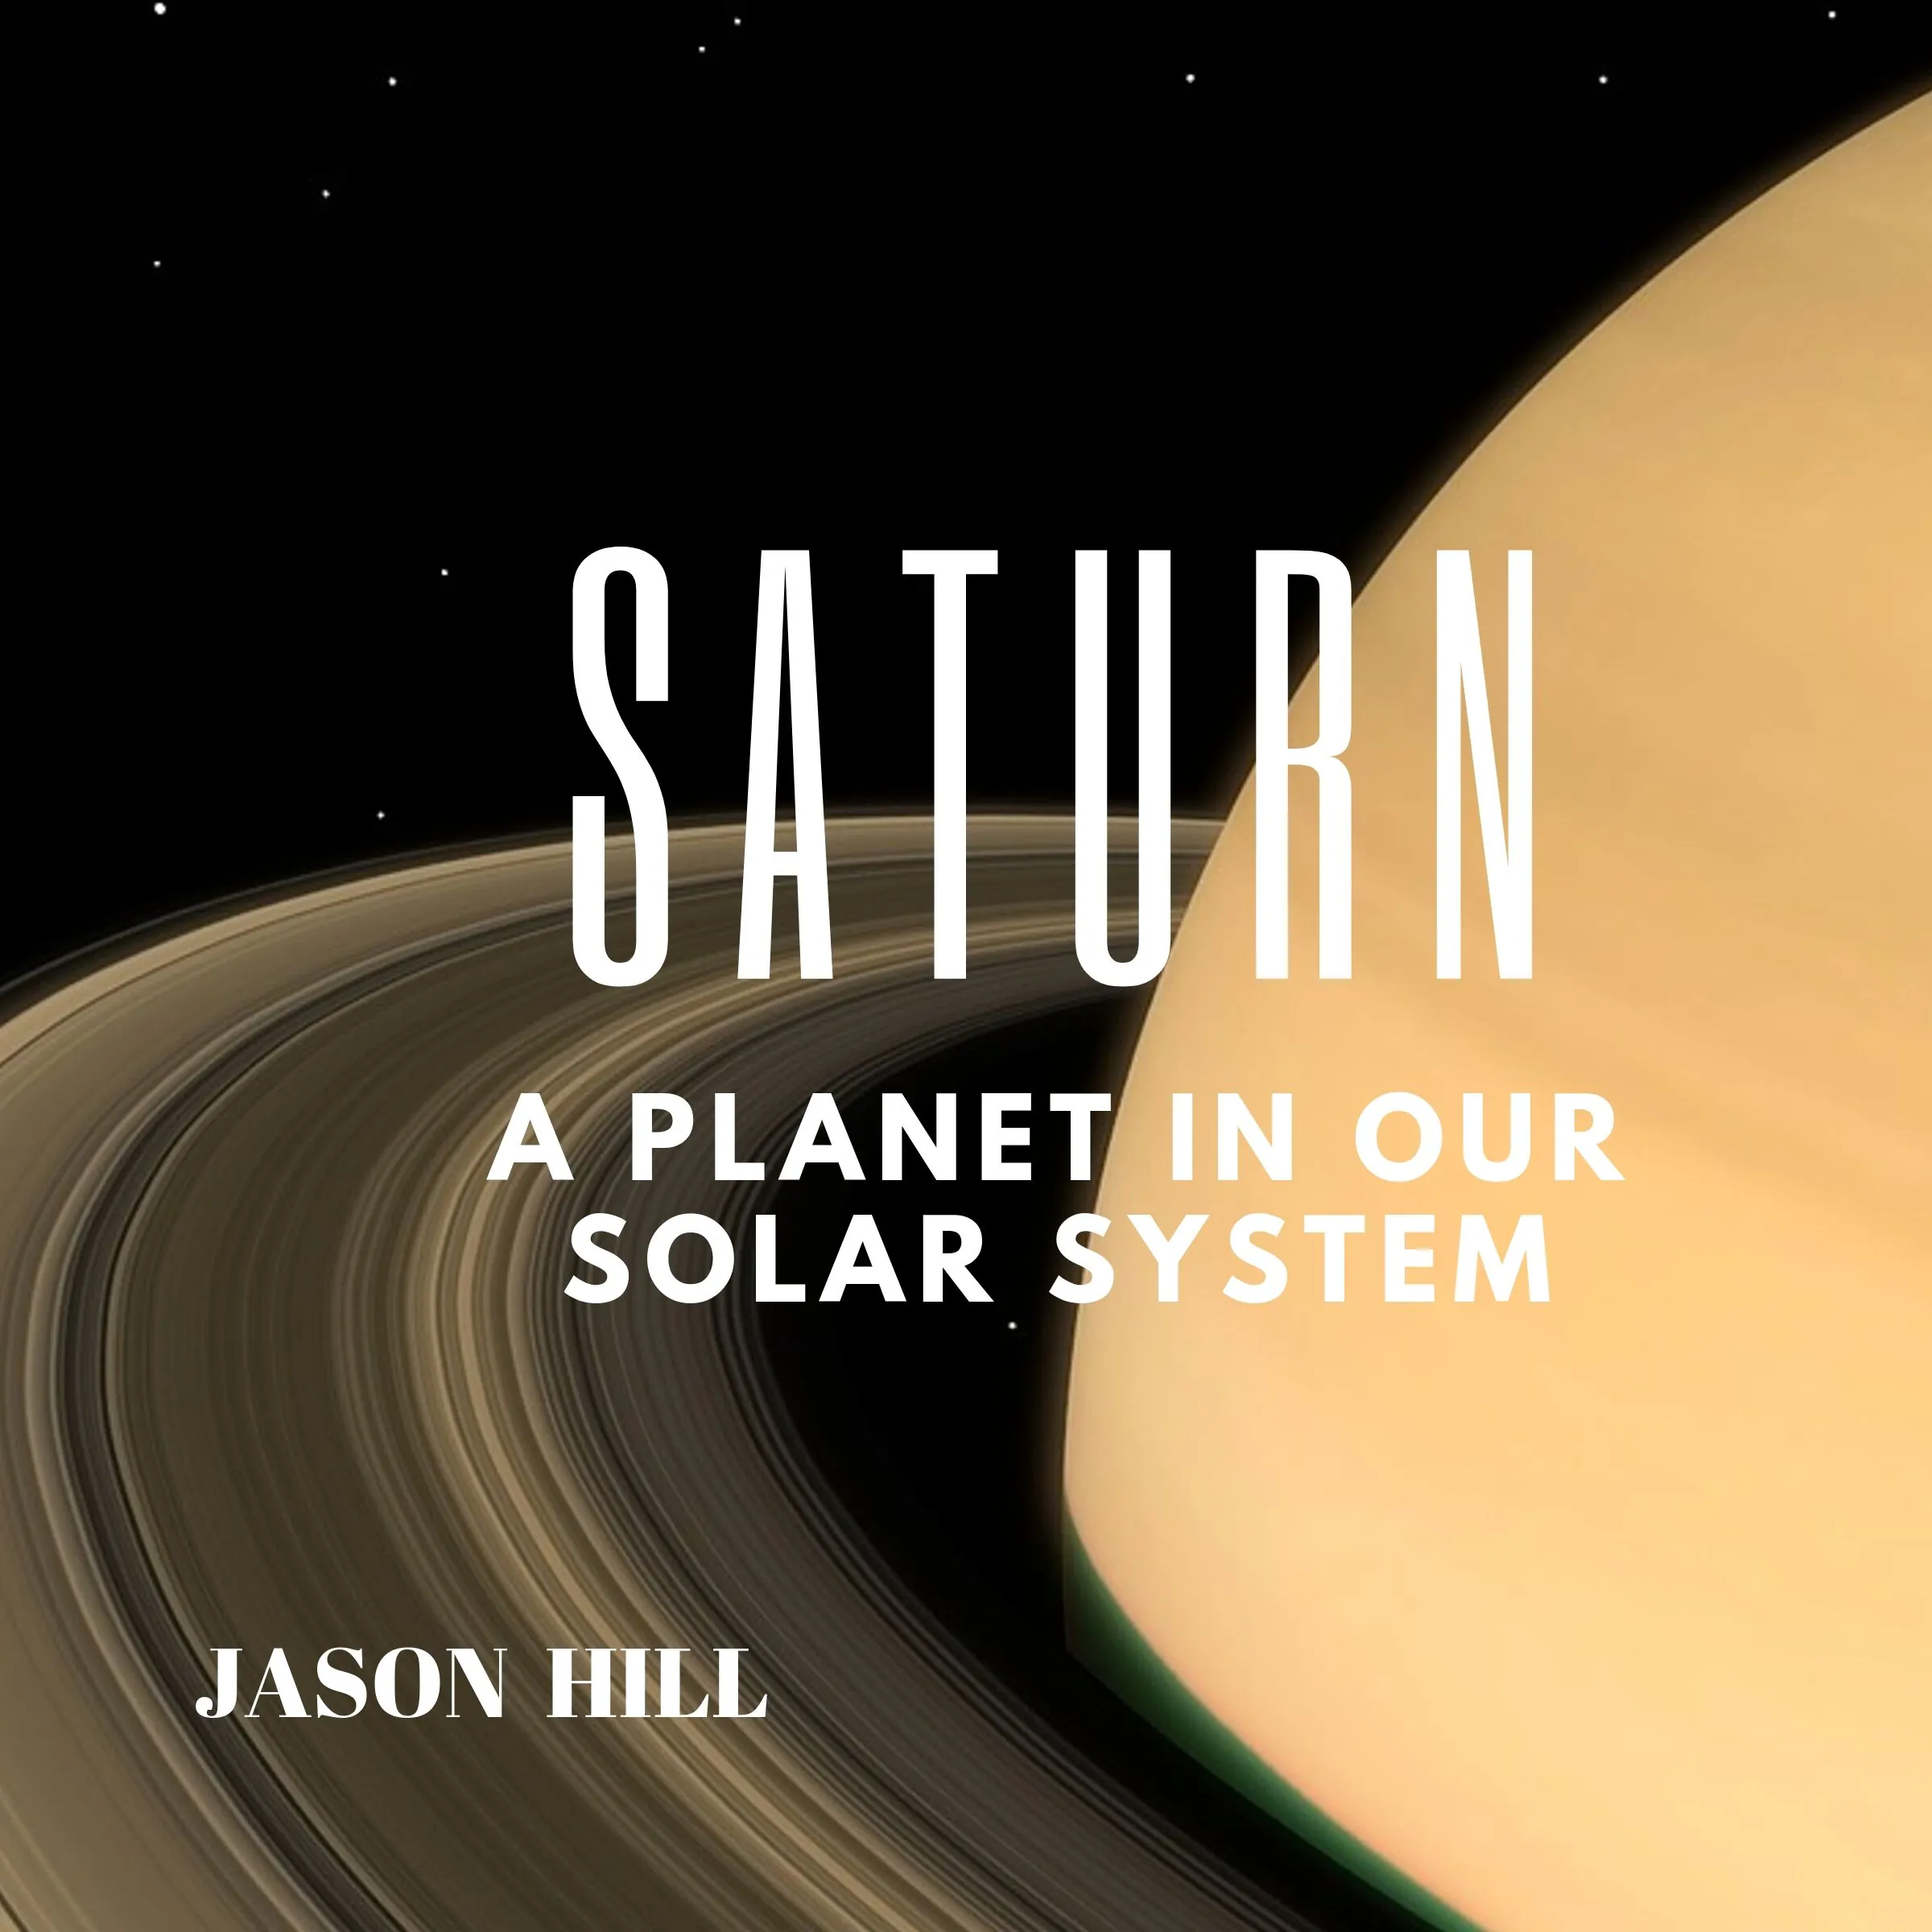 Saturn: A Planet in our Solar System Audiobook by Jason Hill